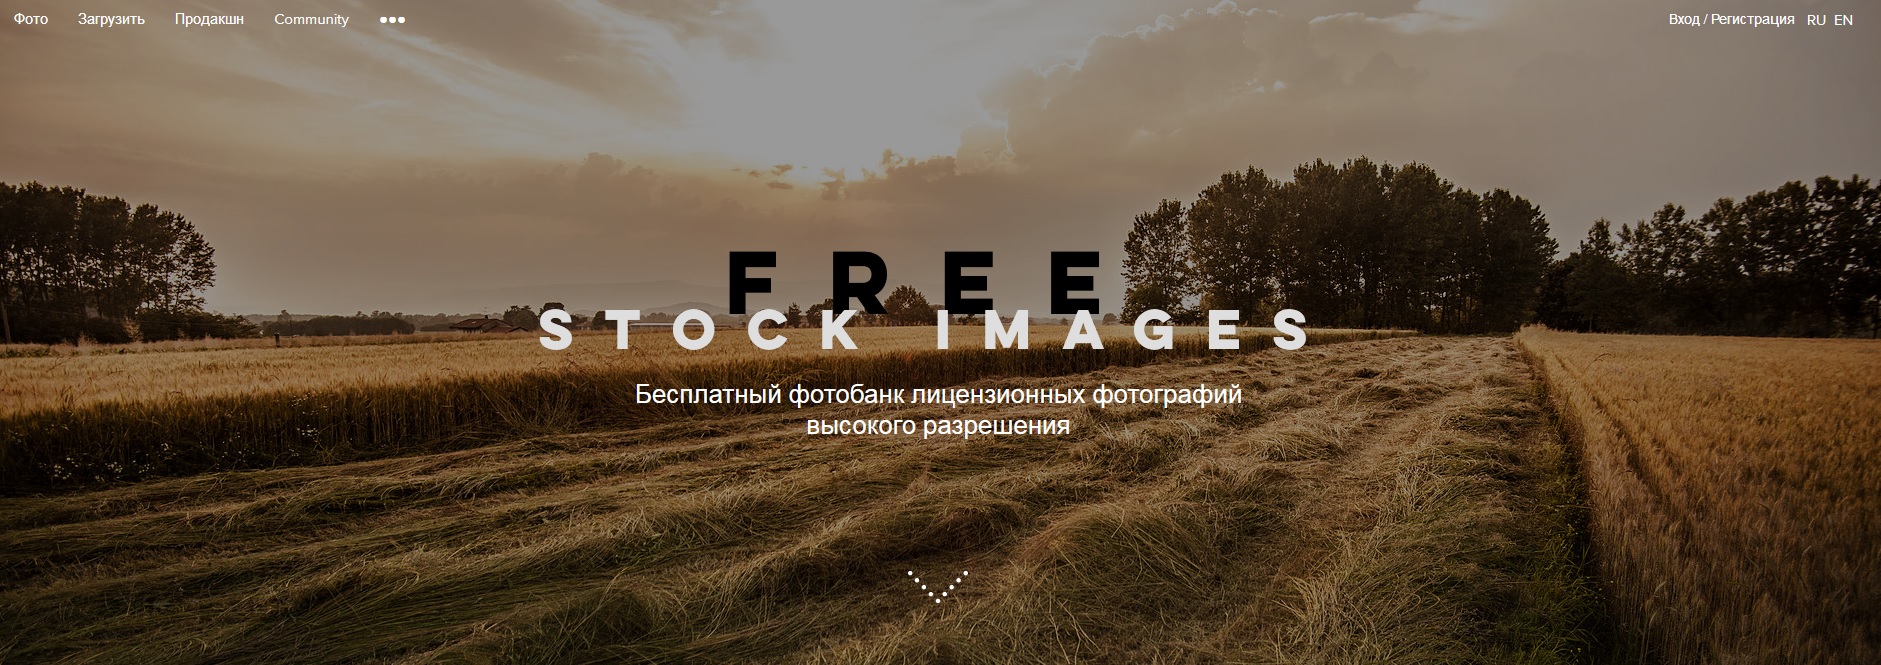 FREE STOCK IMAGES